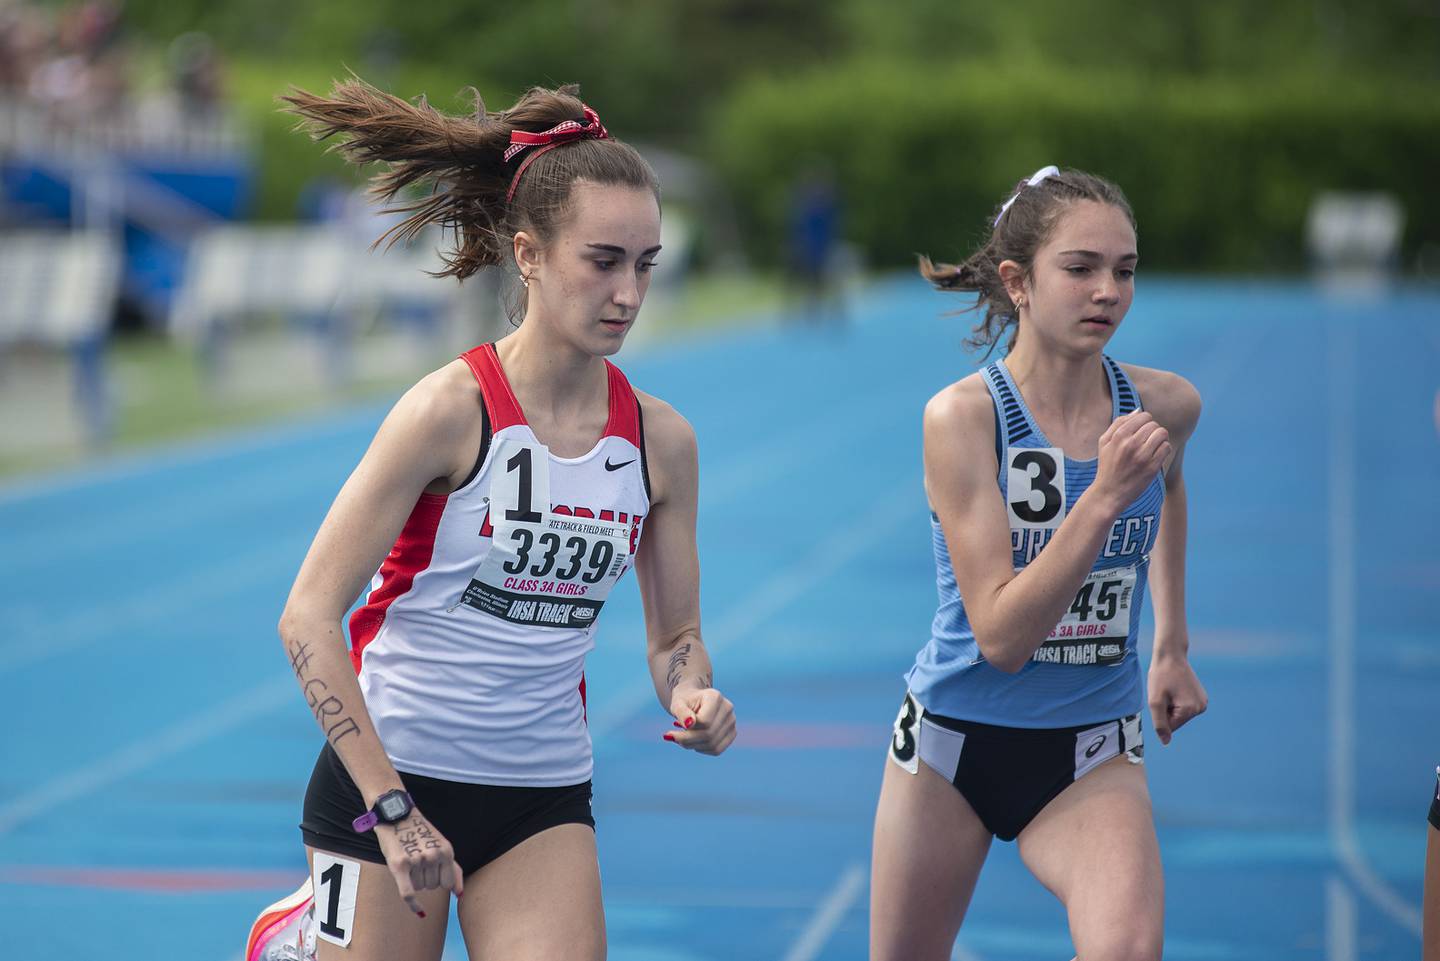 Hinsdale Central's Catie McCabe competes in the 3A 800 finals during the IHSA girls state championships, Saturday, May 21, 2022 in Charleston.